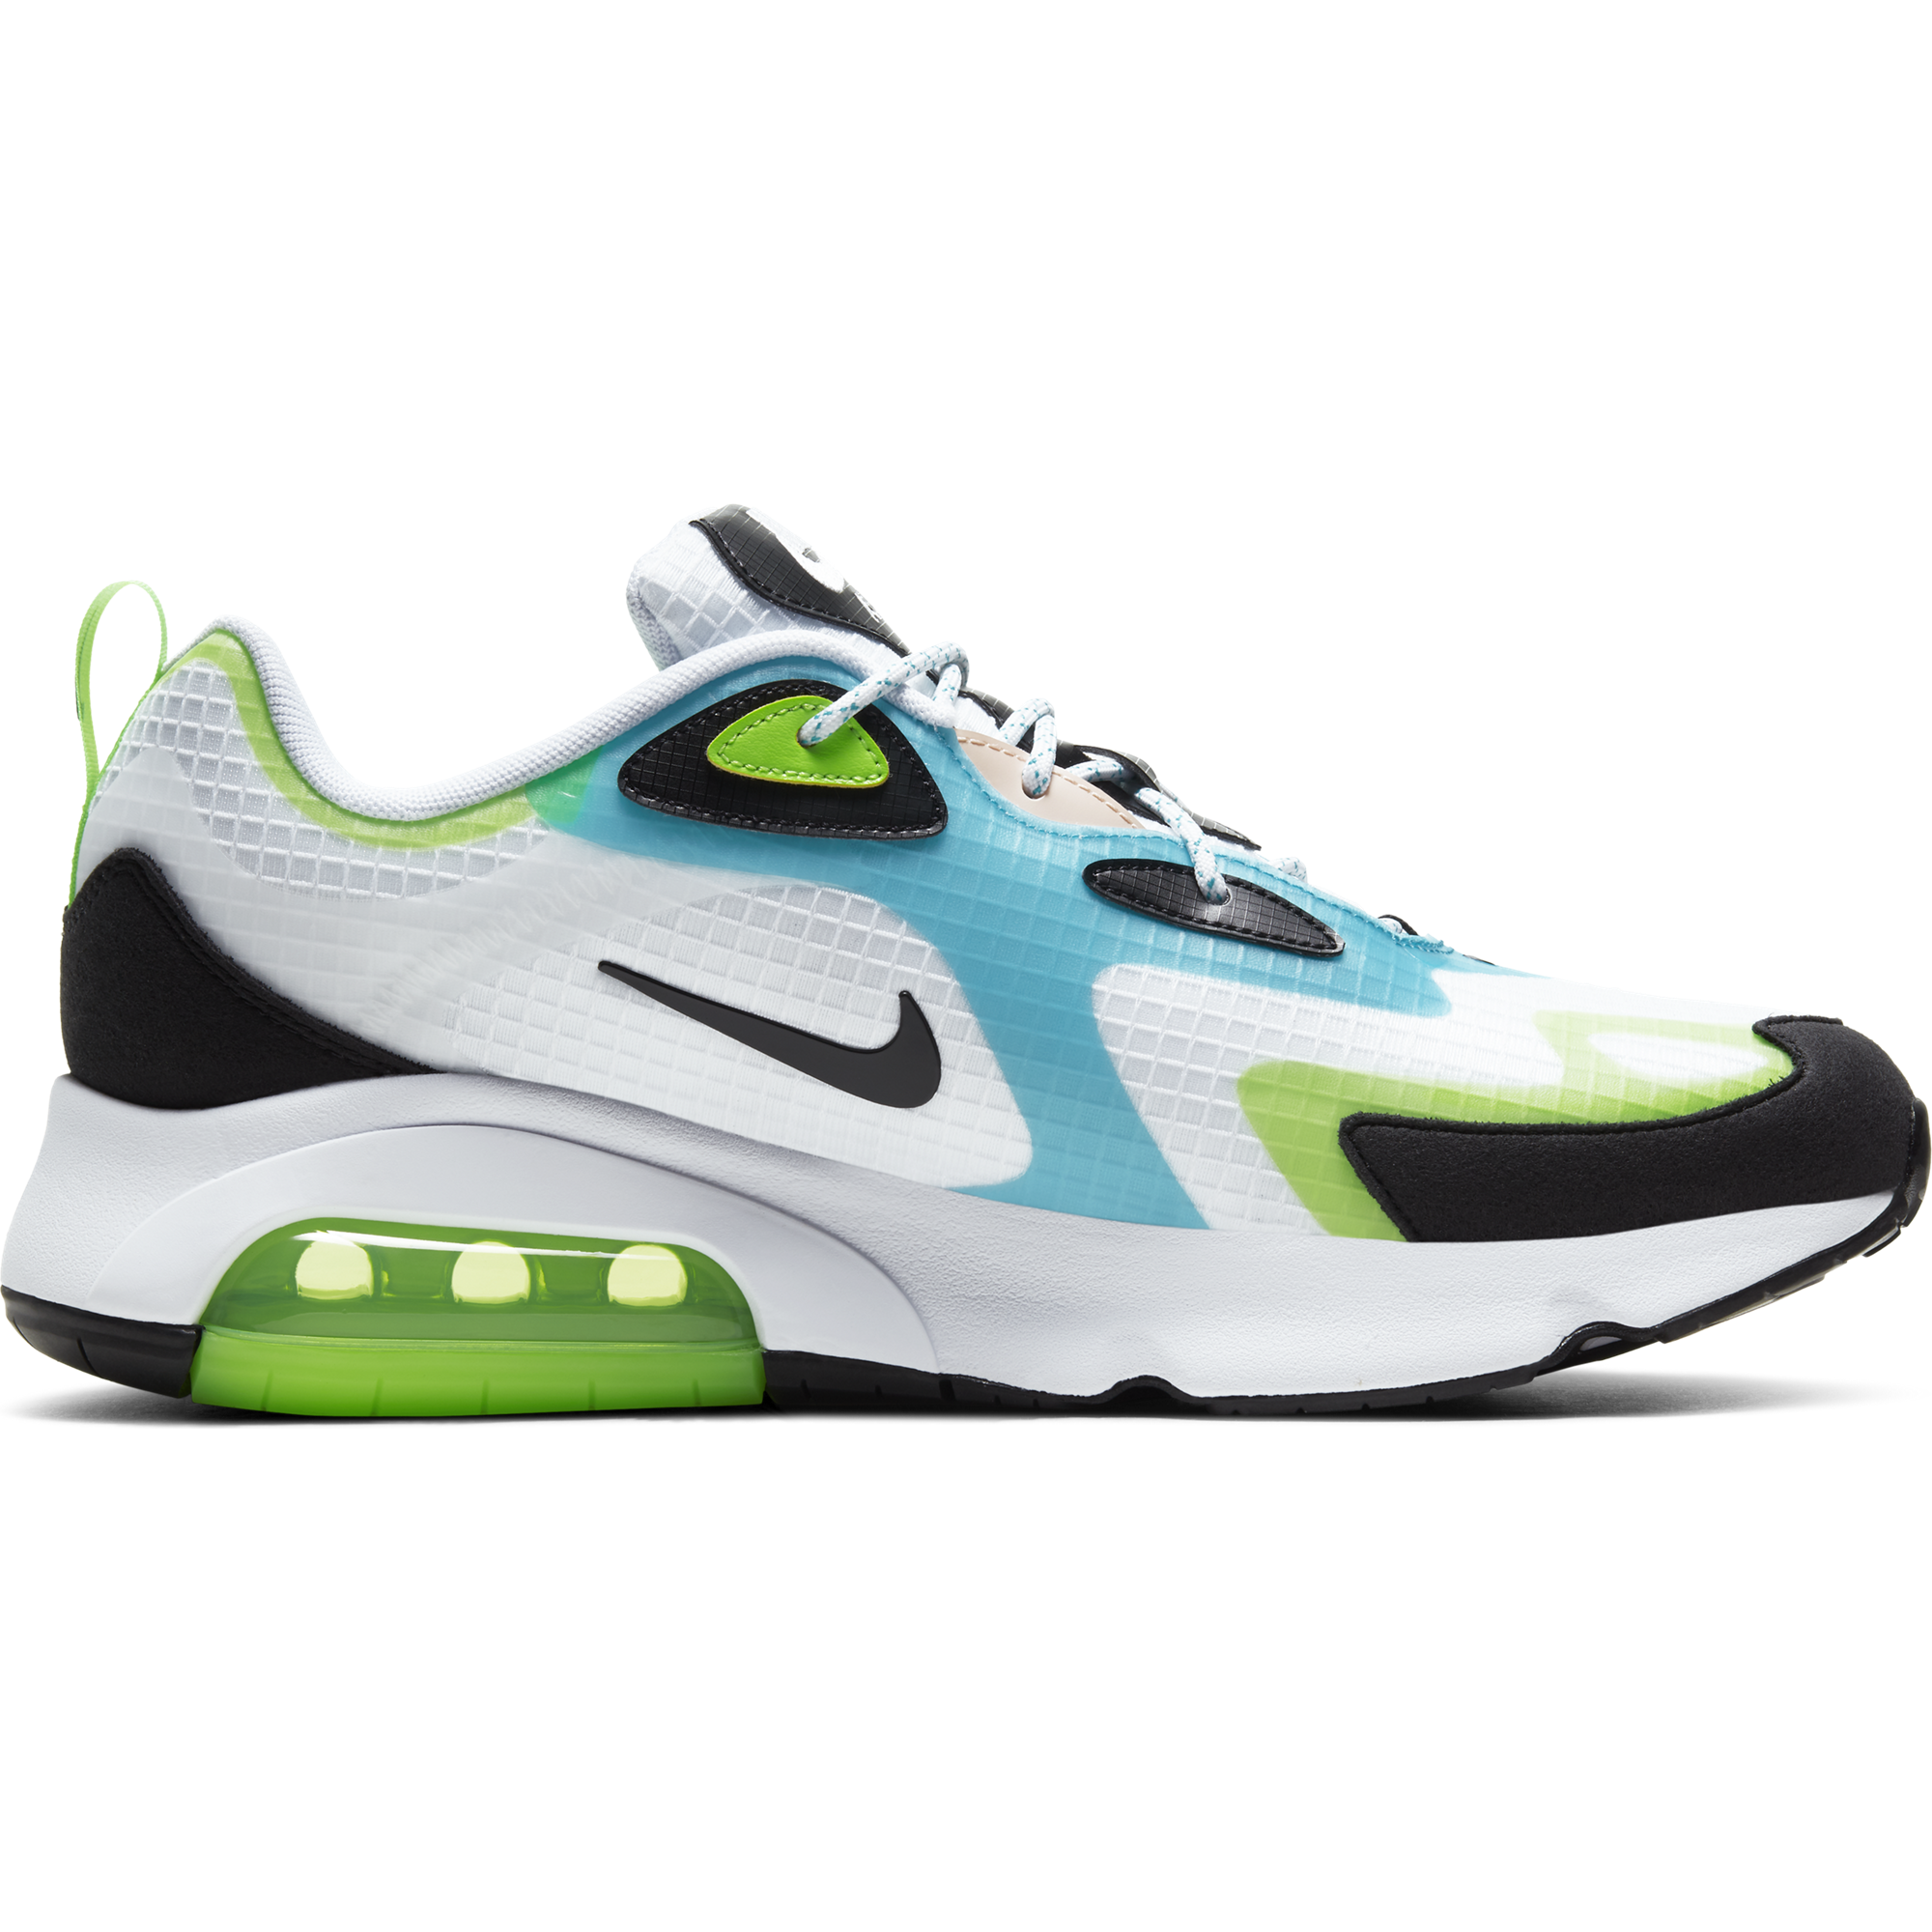 are air max 200 running shoes